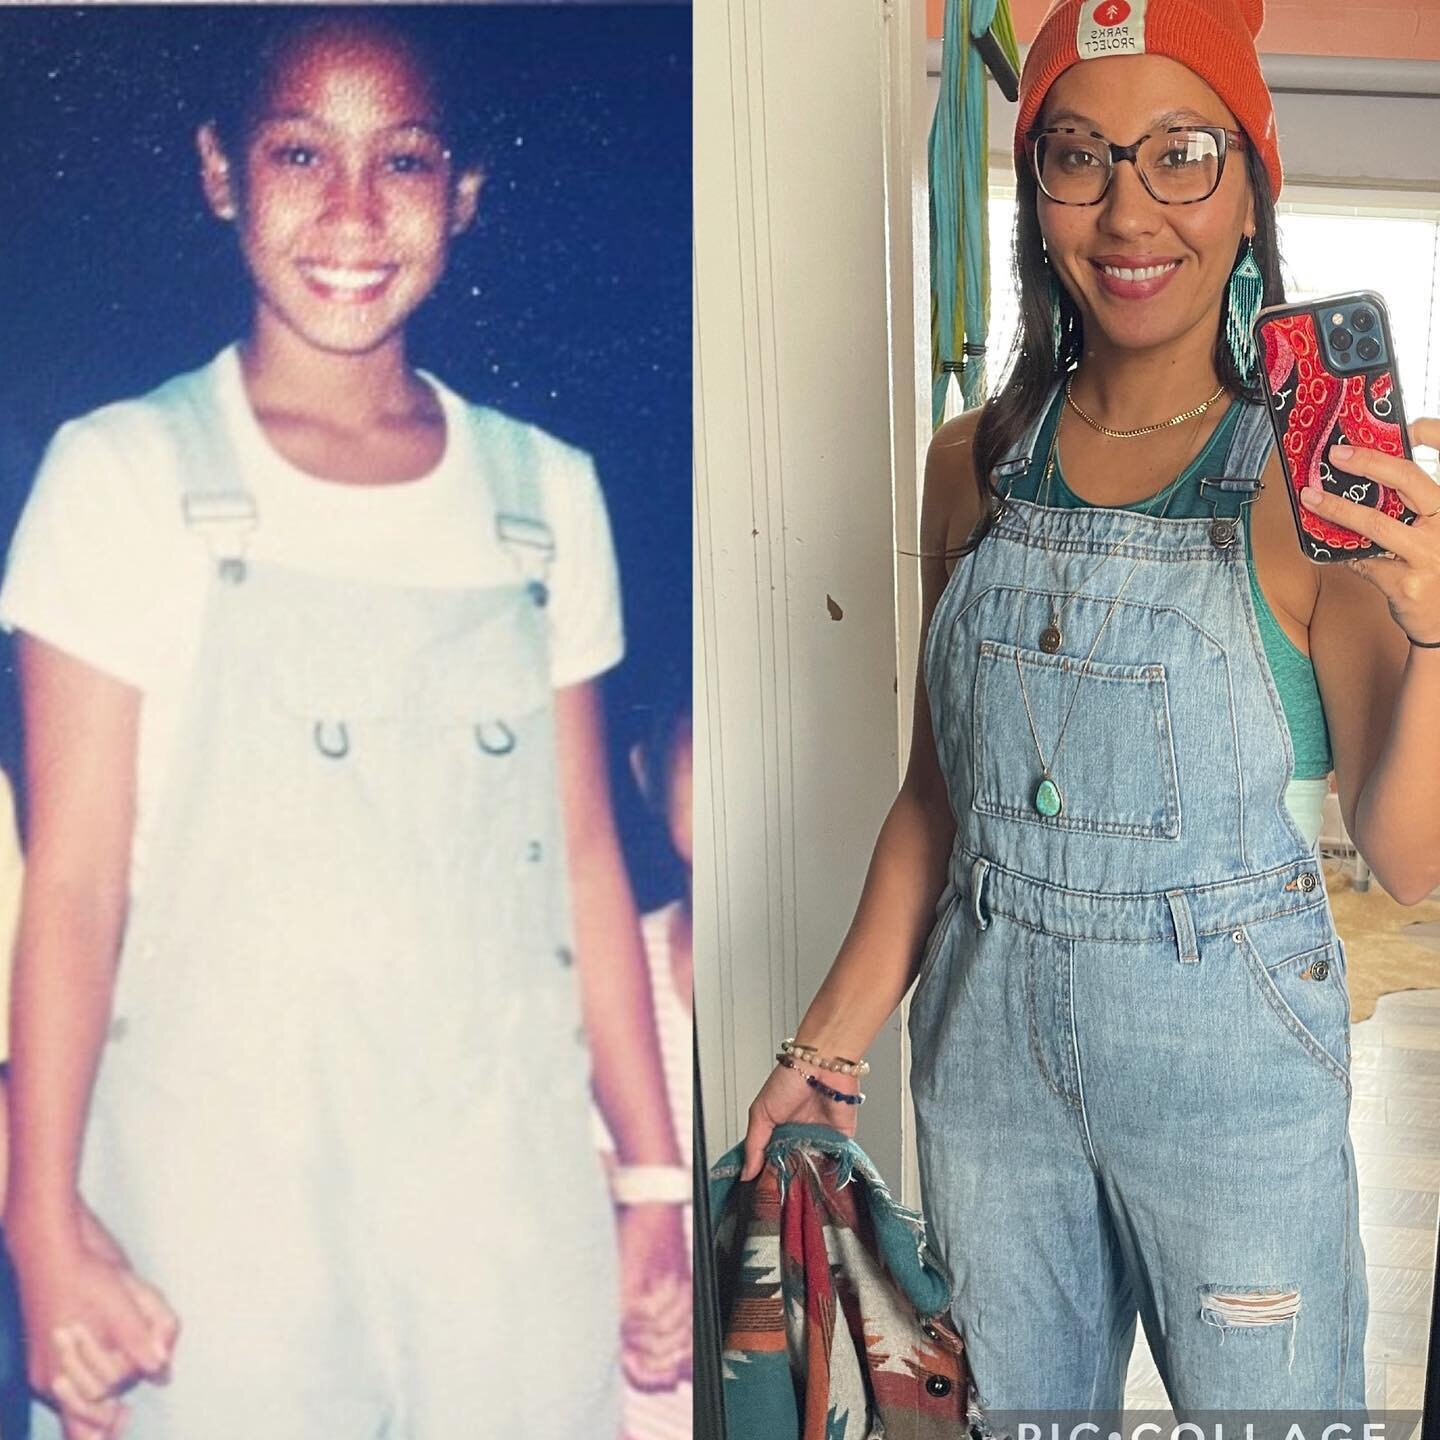 It&rsquo;s that 20-year challenge for me. If you&rsquo;re wondering what my secret is&hellip;. Clearly, it&rsquo;s overalls. Fibers in the overalls get absorbed by your skin, into your circulatory system where they Judy-chop the AARP cells thus preve